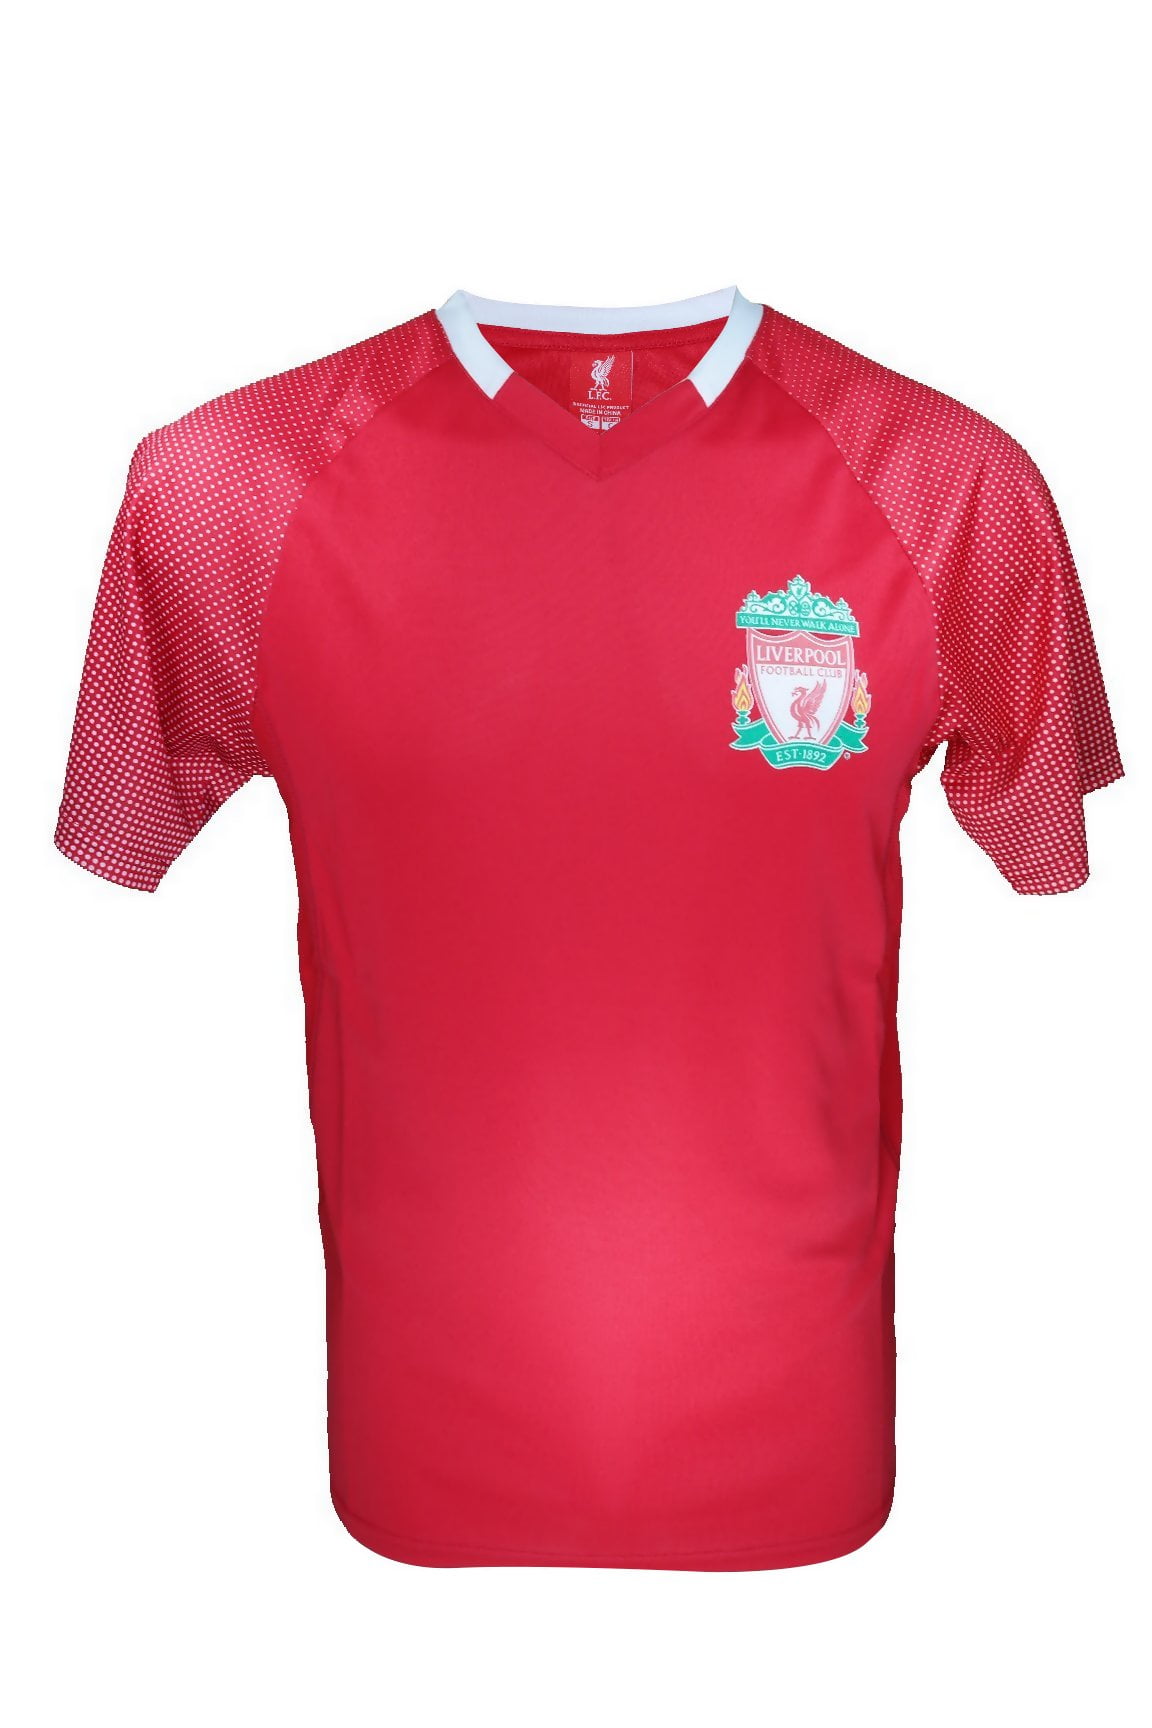 Liverpool F.C Soccer Official Adult Soccer Training Jersey J018 L 